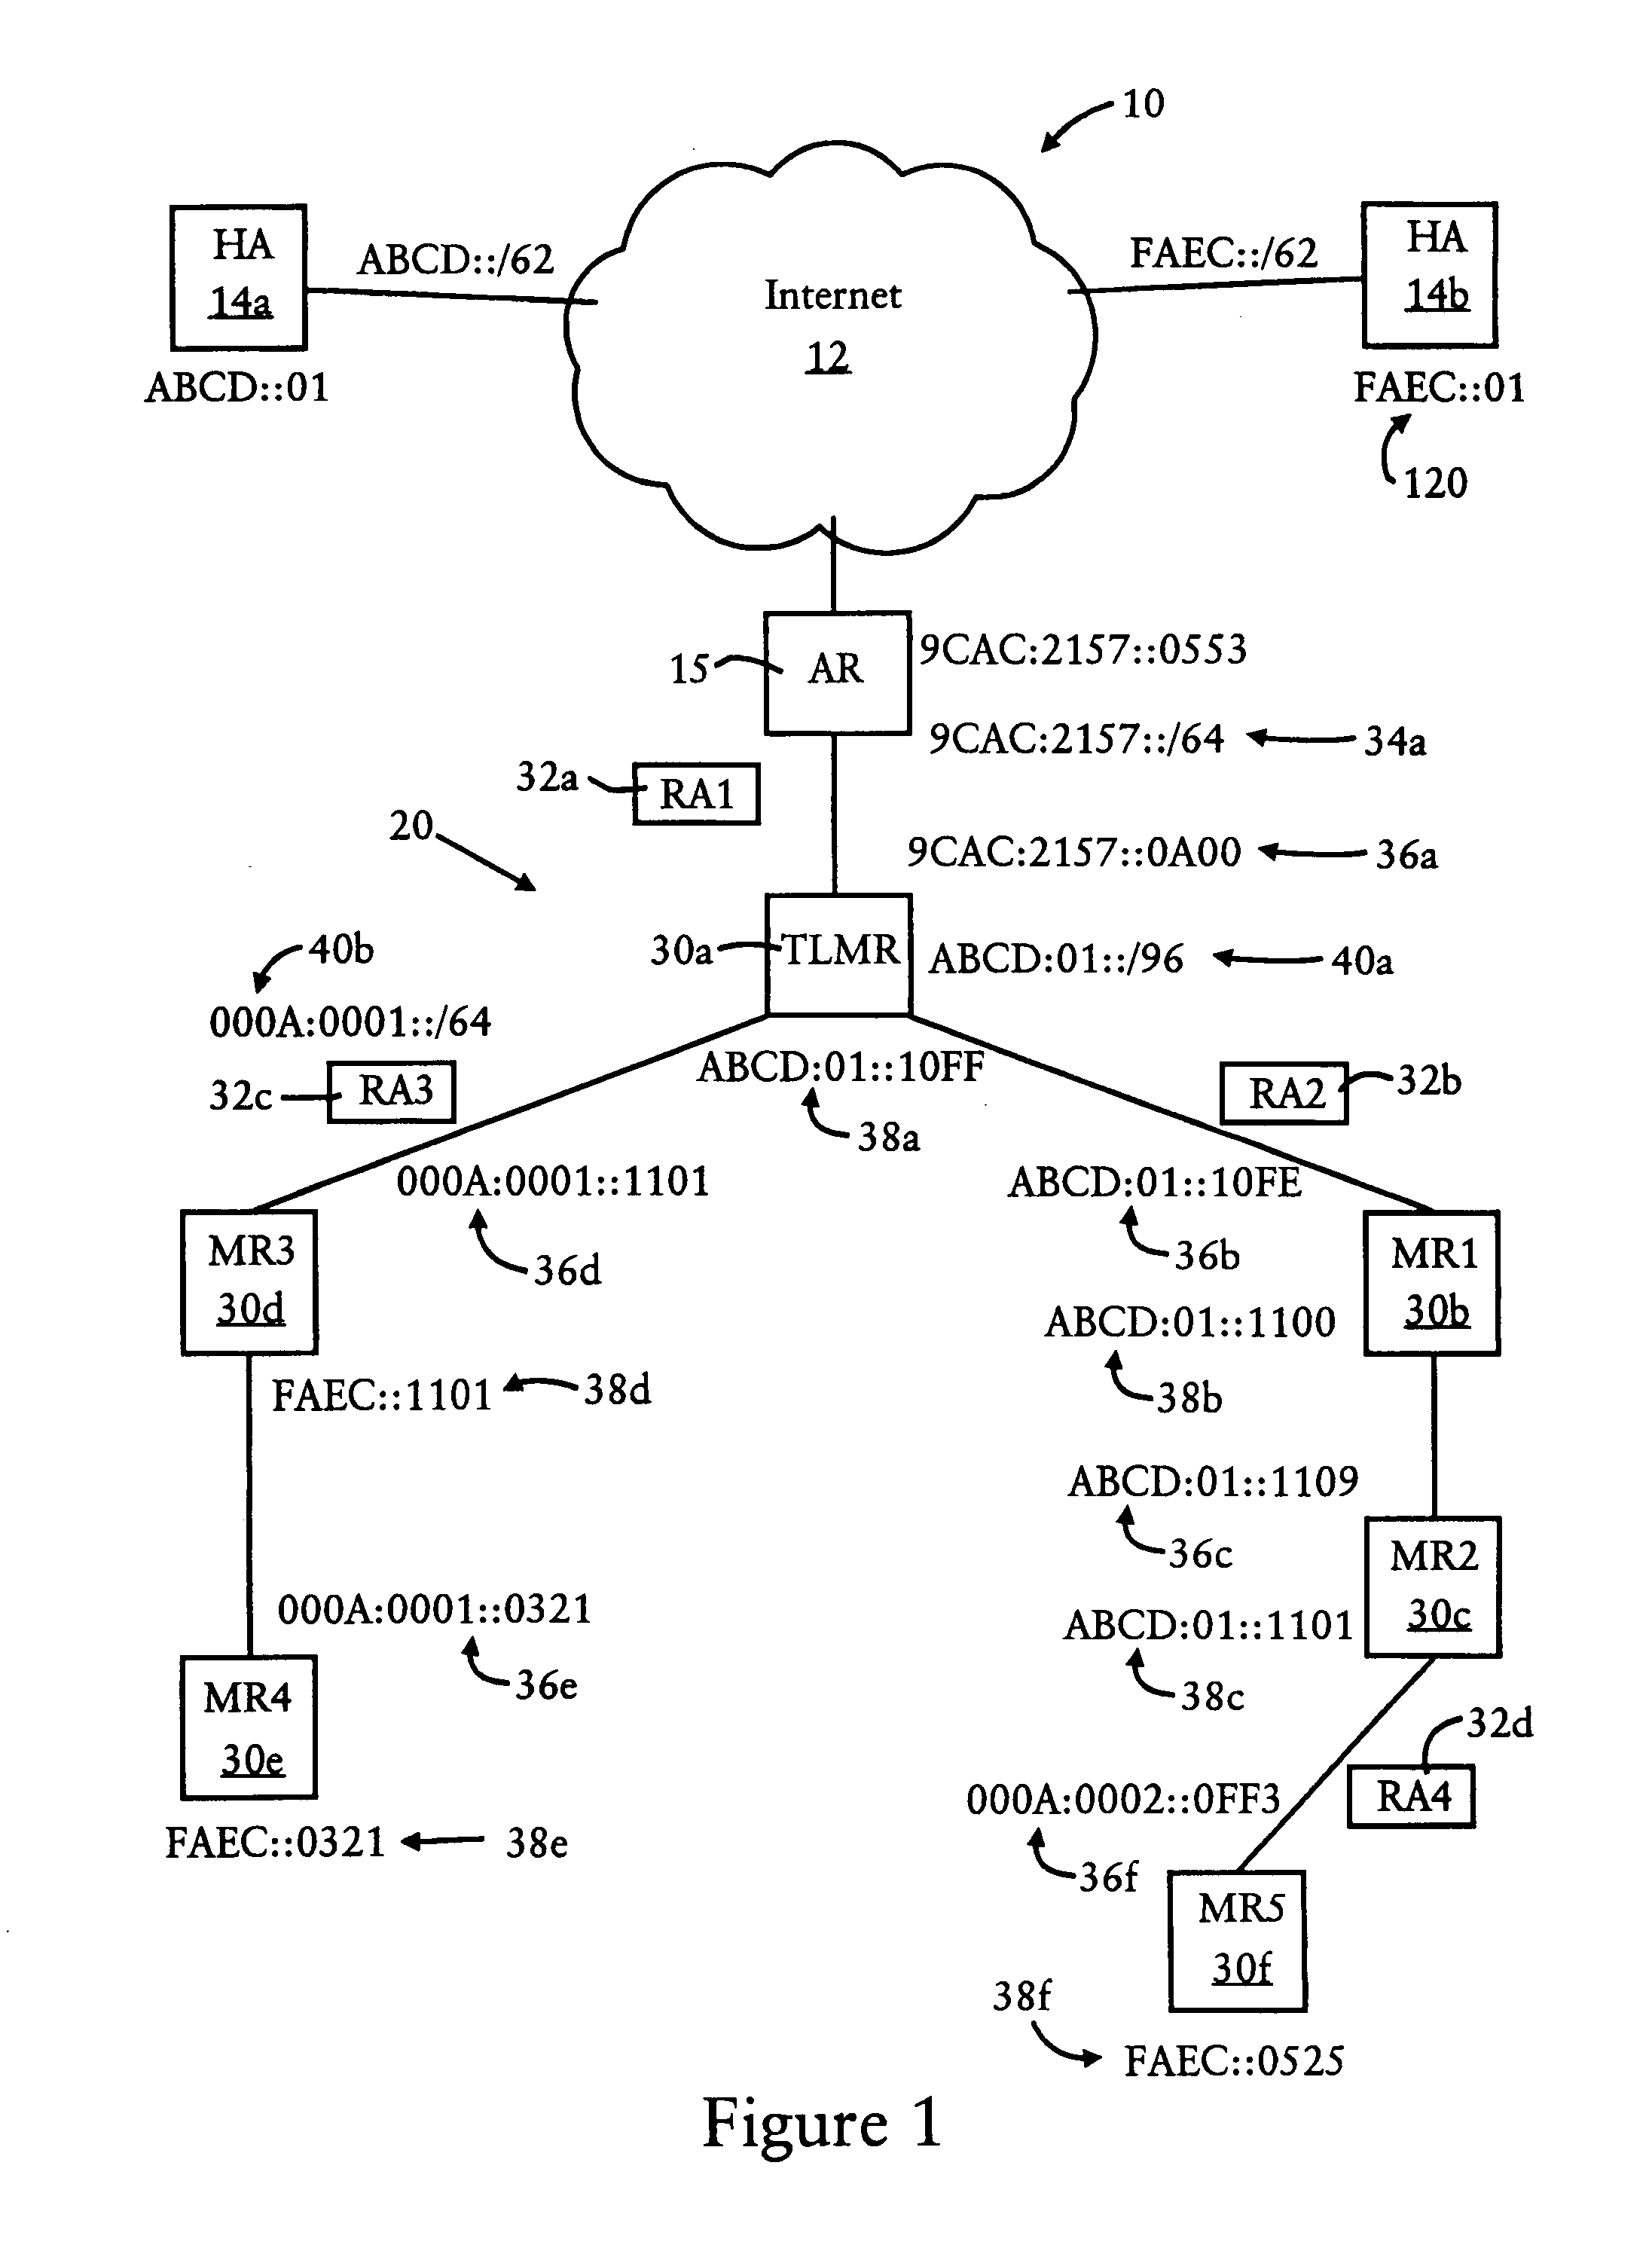 Arrangement in a router of a mobile network for generating a local router prefix for anonymous route connections